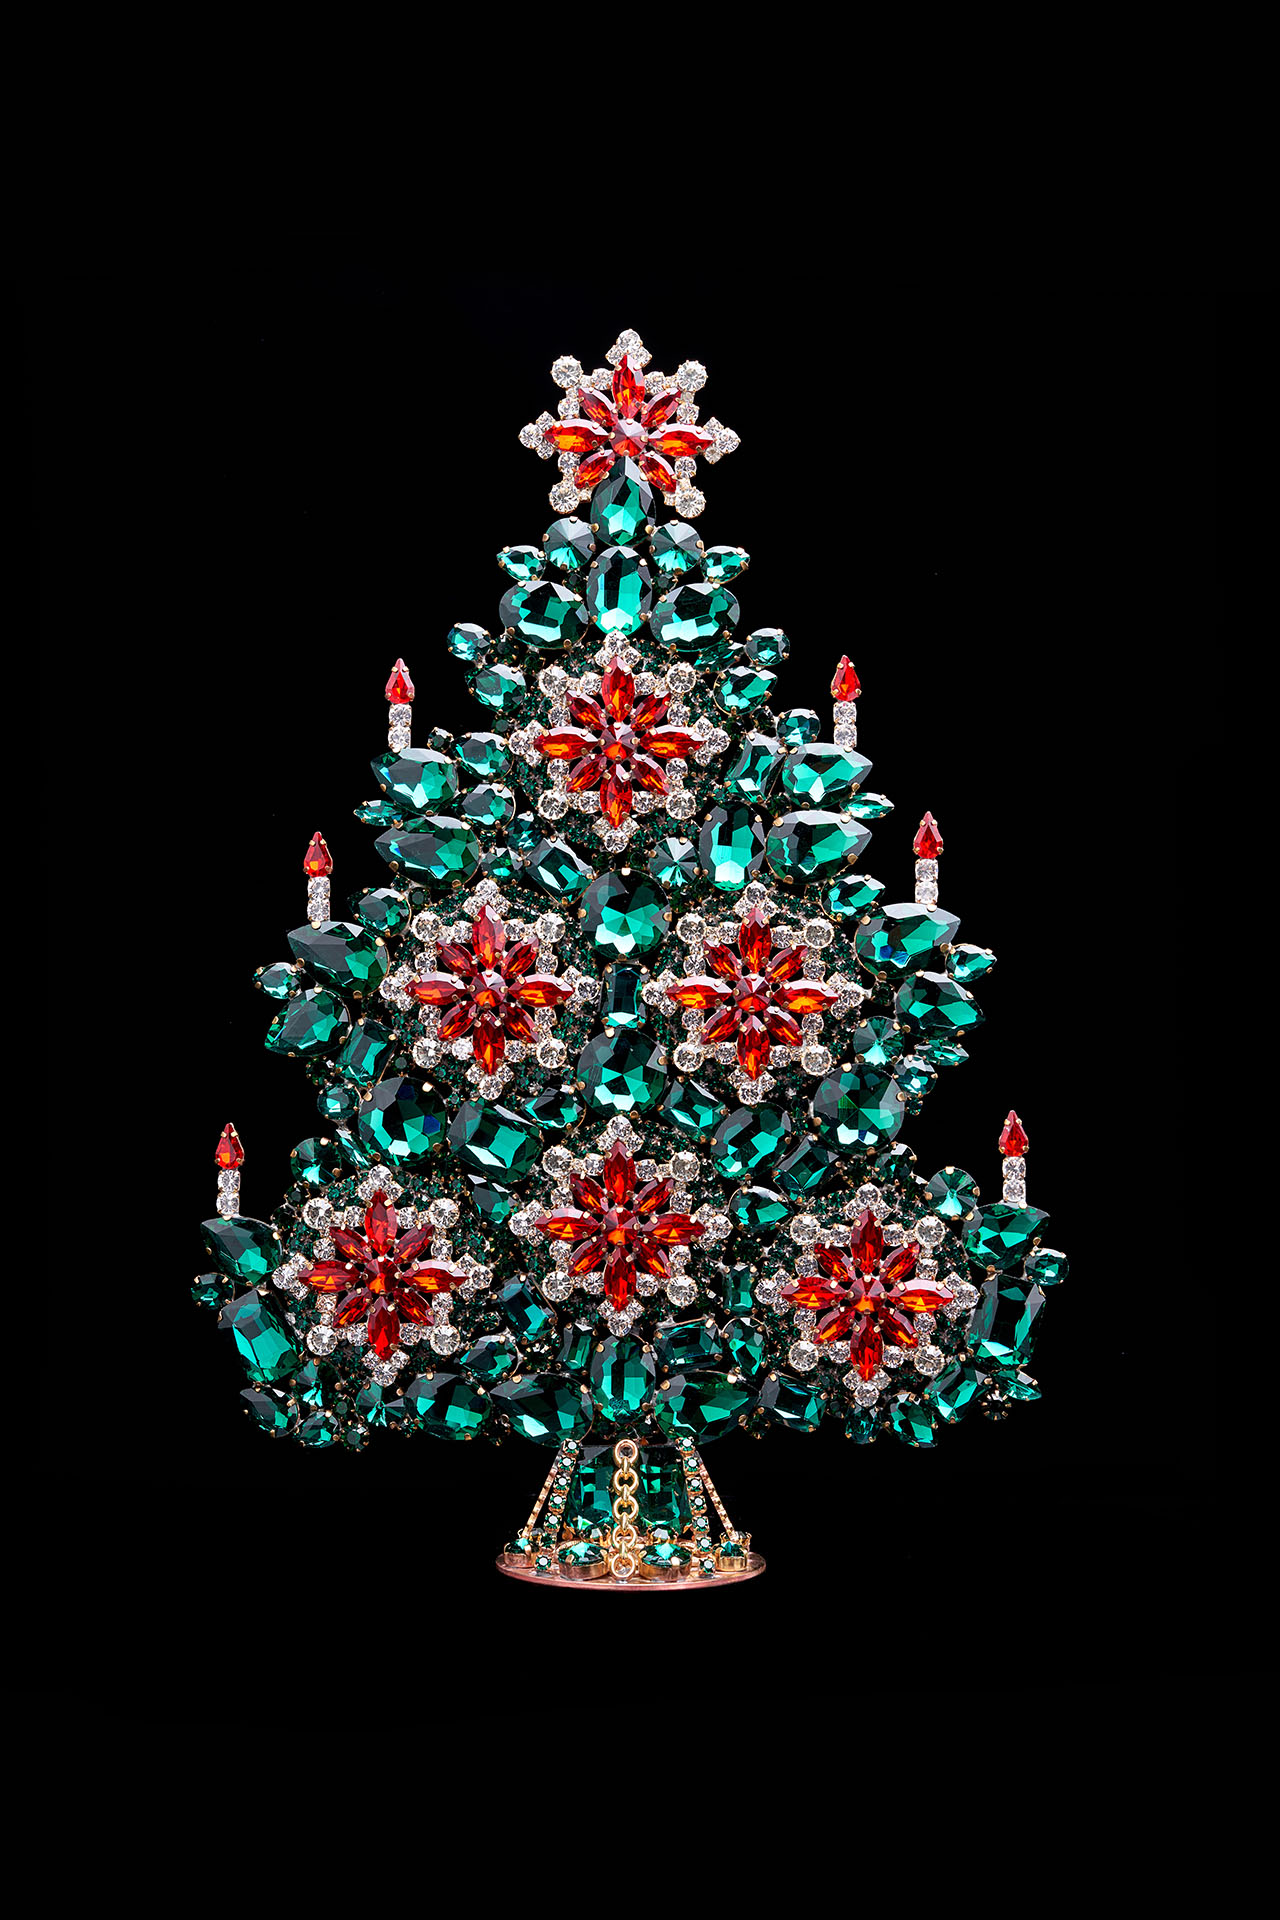 Opulent Xmas Tree, handcrafted with glass tree decorations